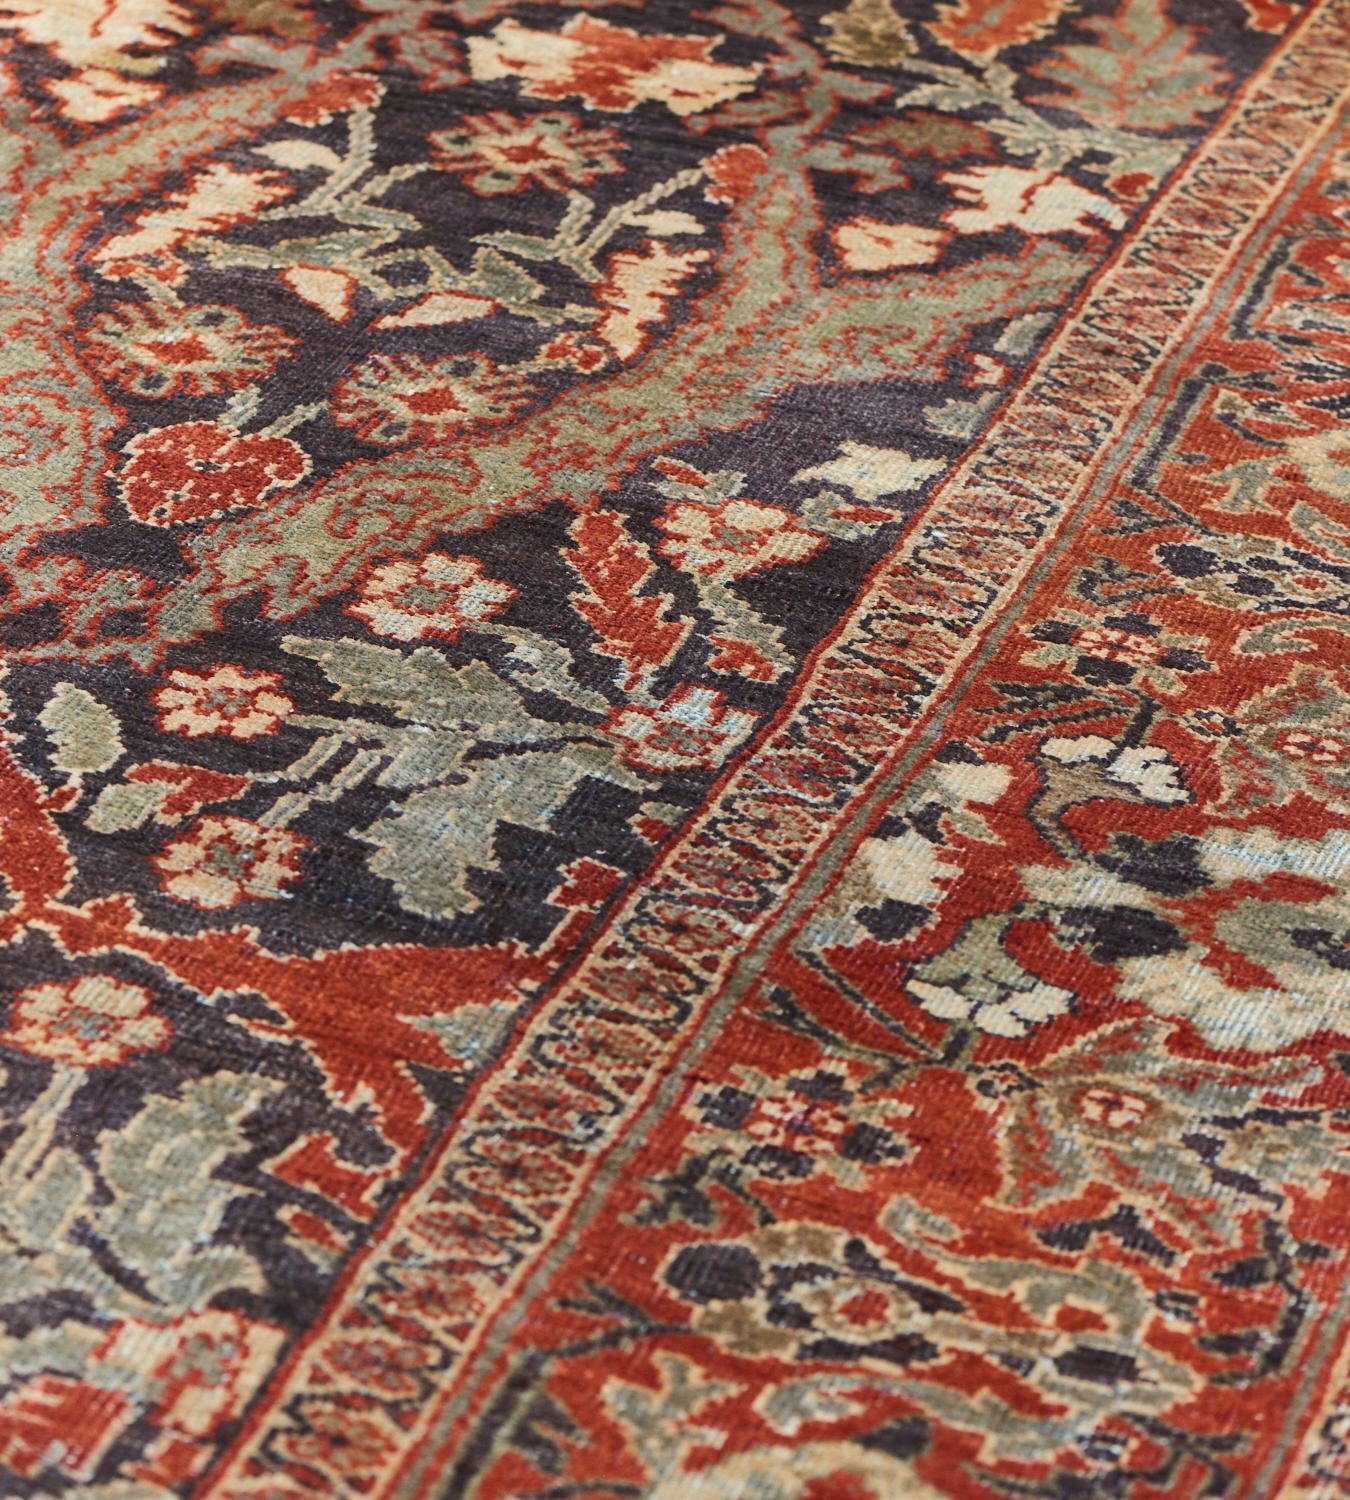 This antique Sultanabad rug has a deep chocolate-brown field with an overall design of bold pale green vine issuing a delicate floral vine around a central column of brick-red spandrels containing a bold central floral motif issuing a variety of